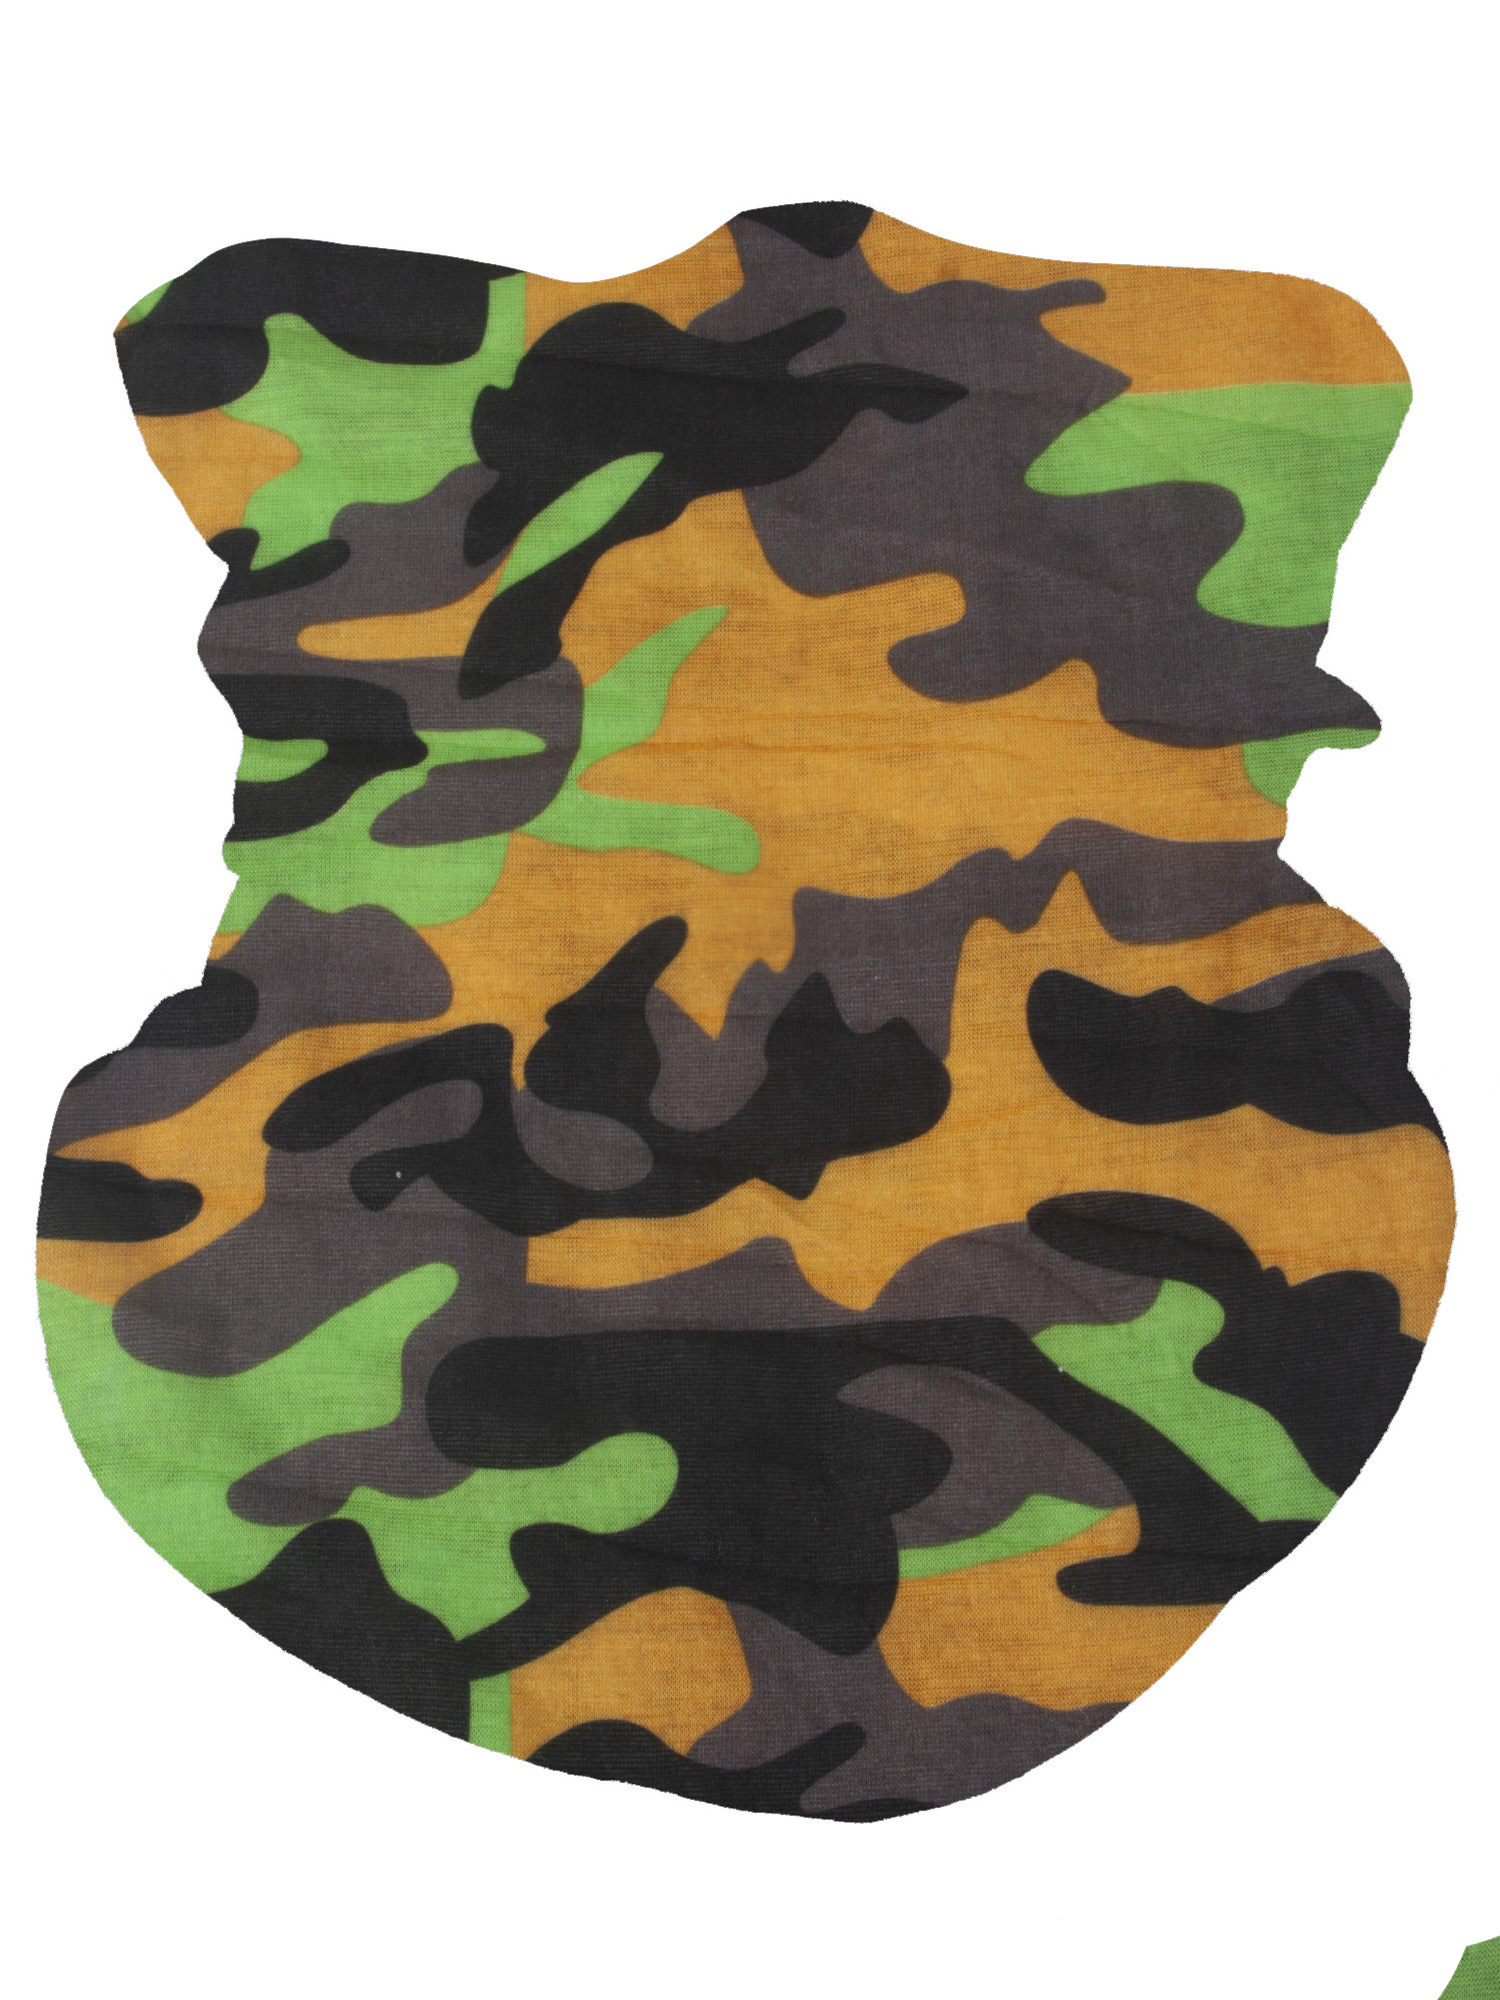 Top Headwear Multifunctional Face Covering Neck Gaiter Scarf - Foliage Camo - image 1 of 2